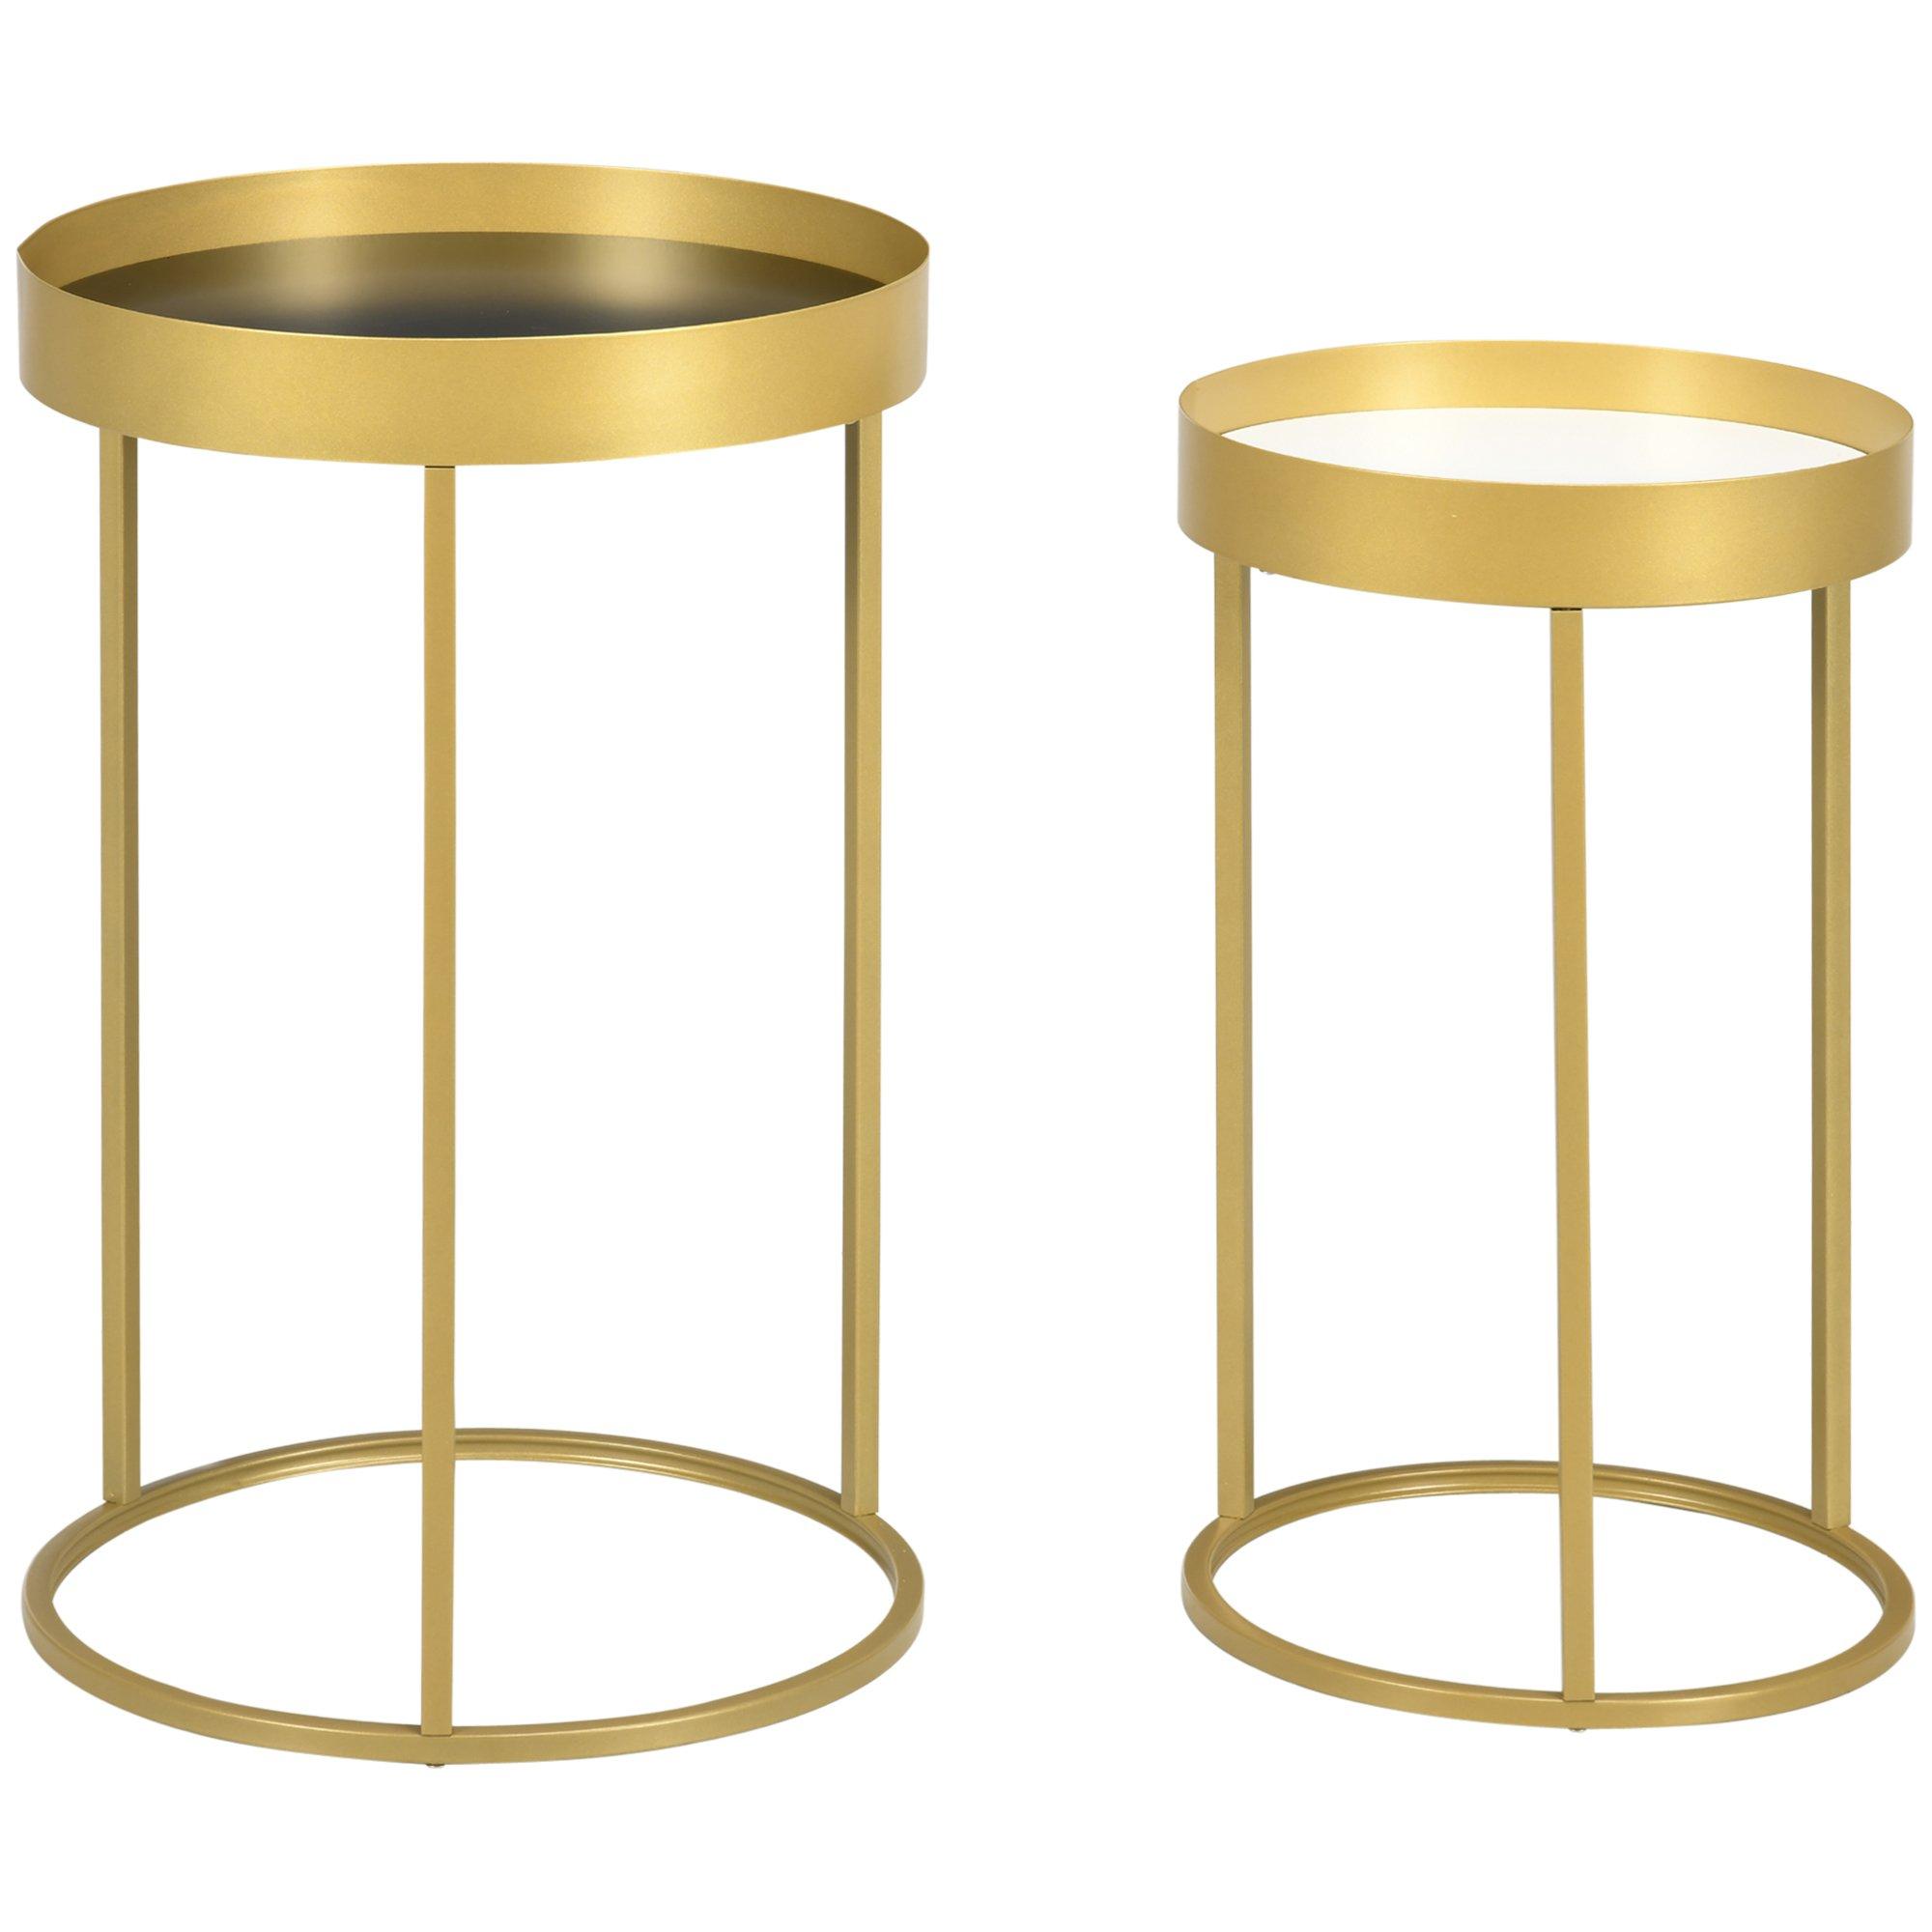 Nesting Coffee Tables Set of 2 Modern Gold End Tables